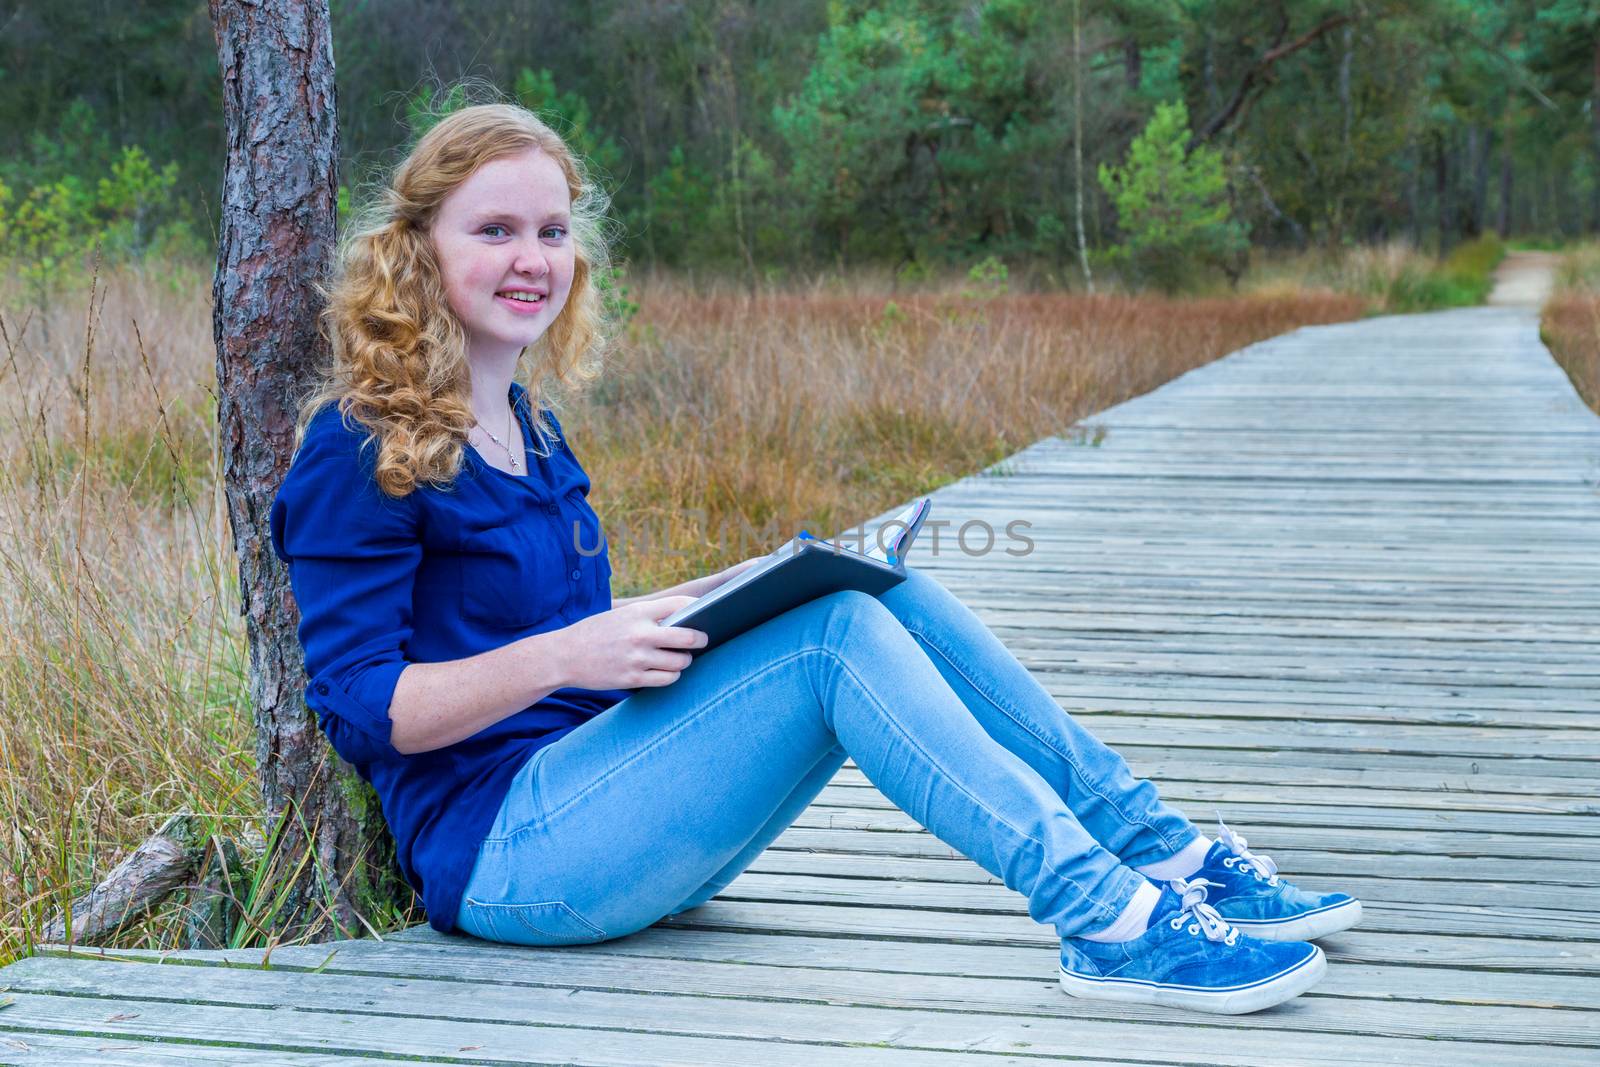 Dutch girl reading book on wooden path in forest by BenSchonewille